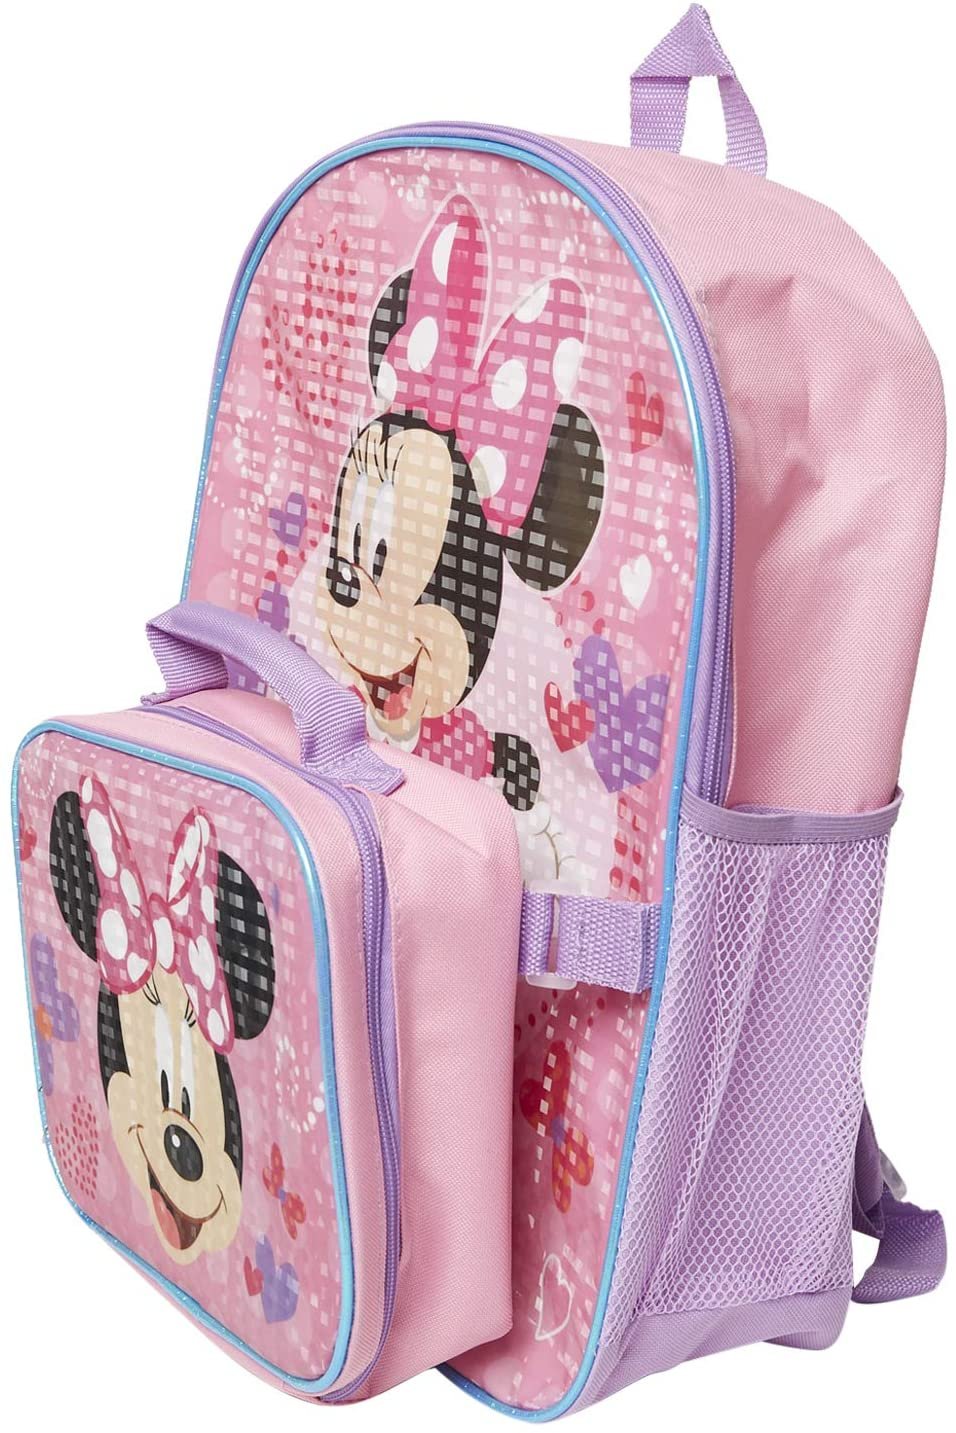 Minnie Mouse Backpack Combo Set - Minnie Mouse Girls 4 Piece Backpack Set - Backpack, Lunch Box, Water Bottle And Carabina Minnie Mouse 4Pc - image 2 of 7